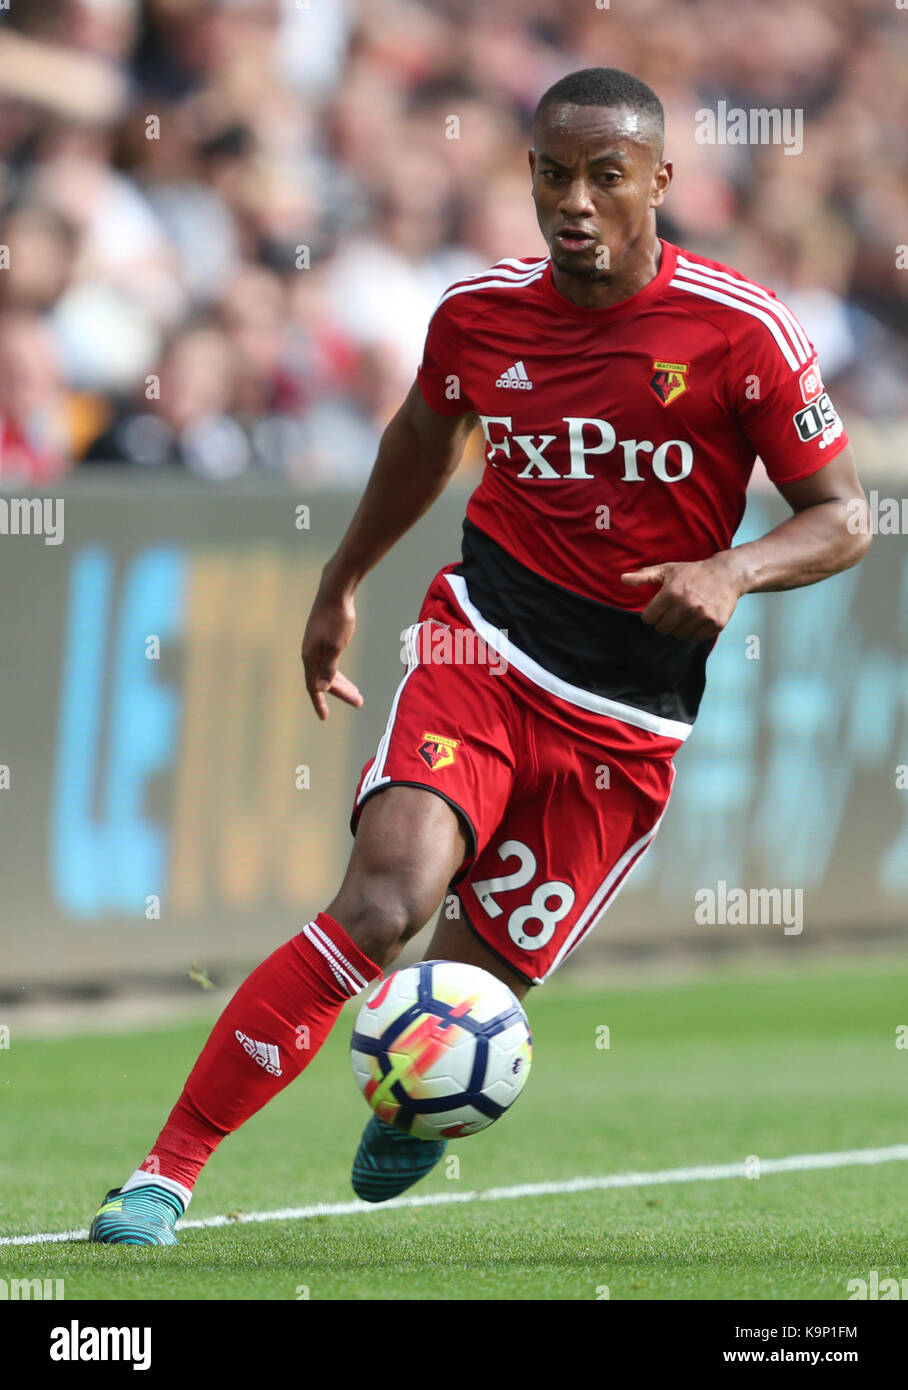 Watford's Andre Carrillo during the Premier League match at the Liberty Stadium, Swansea. PRESS ASSOCIATION Photo. Picture date: Saturday September 23, 2017. See PA story SOCCER Swansea. Photo credit should read: David Davies/PA Wire. RESTRICTIONS: EDITORIAL USE ONLY No use with unauthorised audio, video, data, fixture lists, club/league logos or 'live' services. Online in-match use limited to 75 images, no video emulation. No use in betting, games or single club/league/player publications Stock Photo